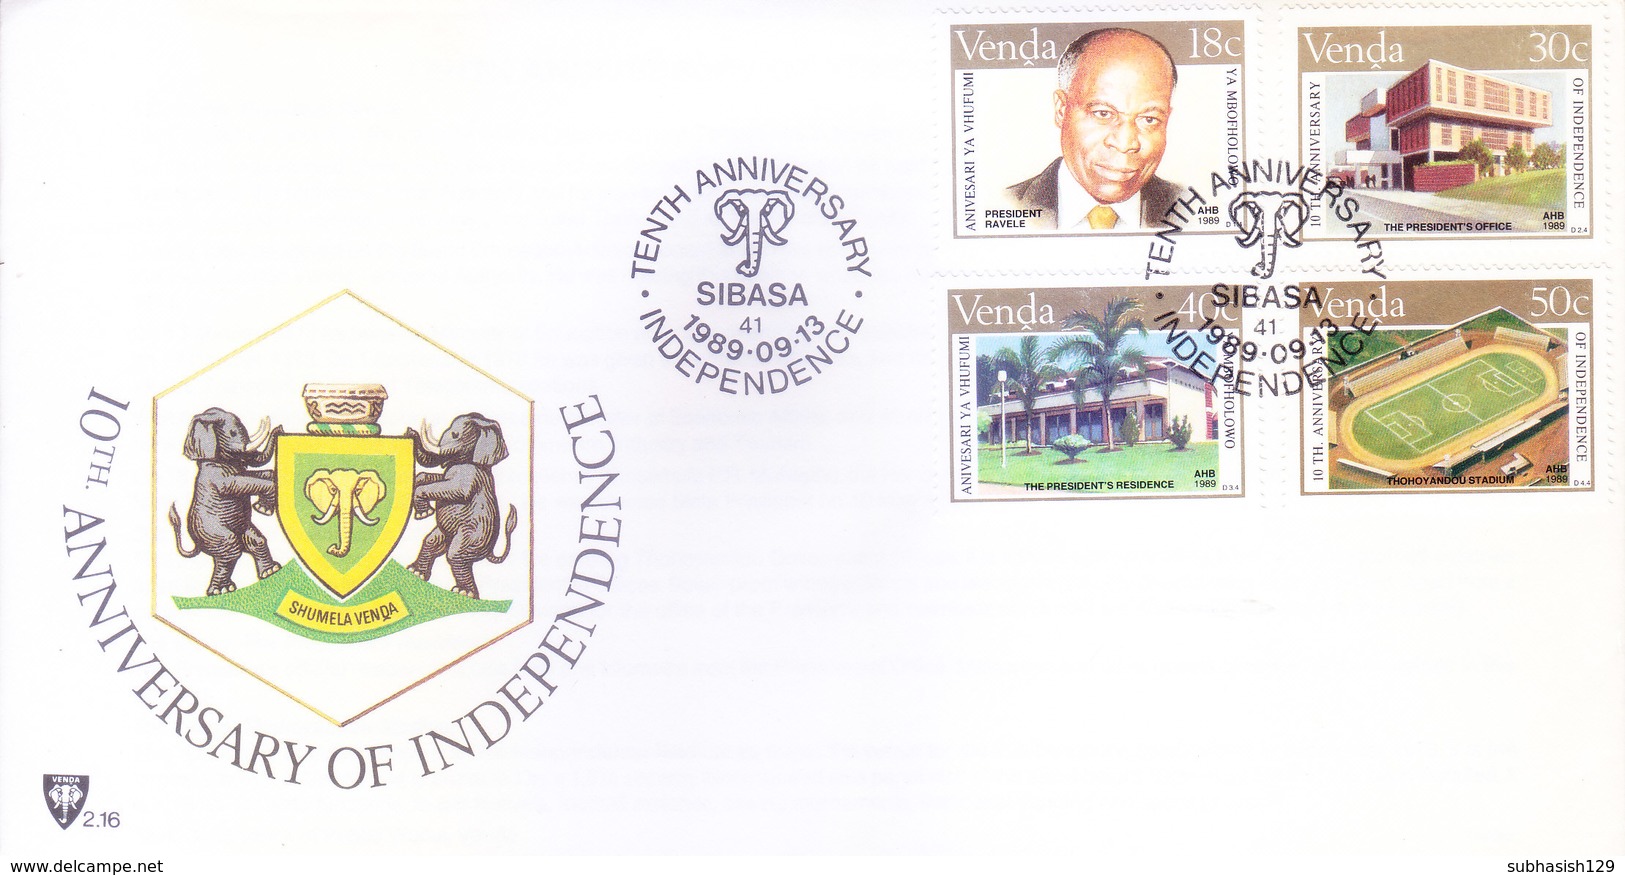 VENDA / SOUTH AFRICA : FIRST DAY COVER WITH INFORMATION BROCHURE INSIDE : 10TH ANNIVERSARY OF INDEPENDENCE : 13-09-1989 - Bophuthatswana